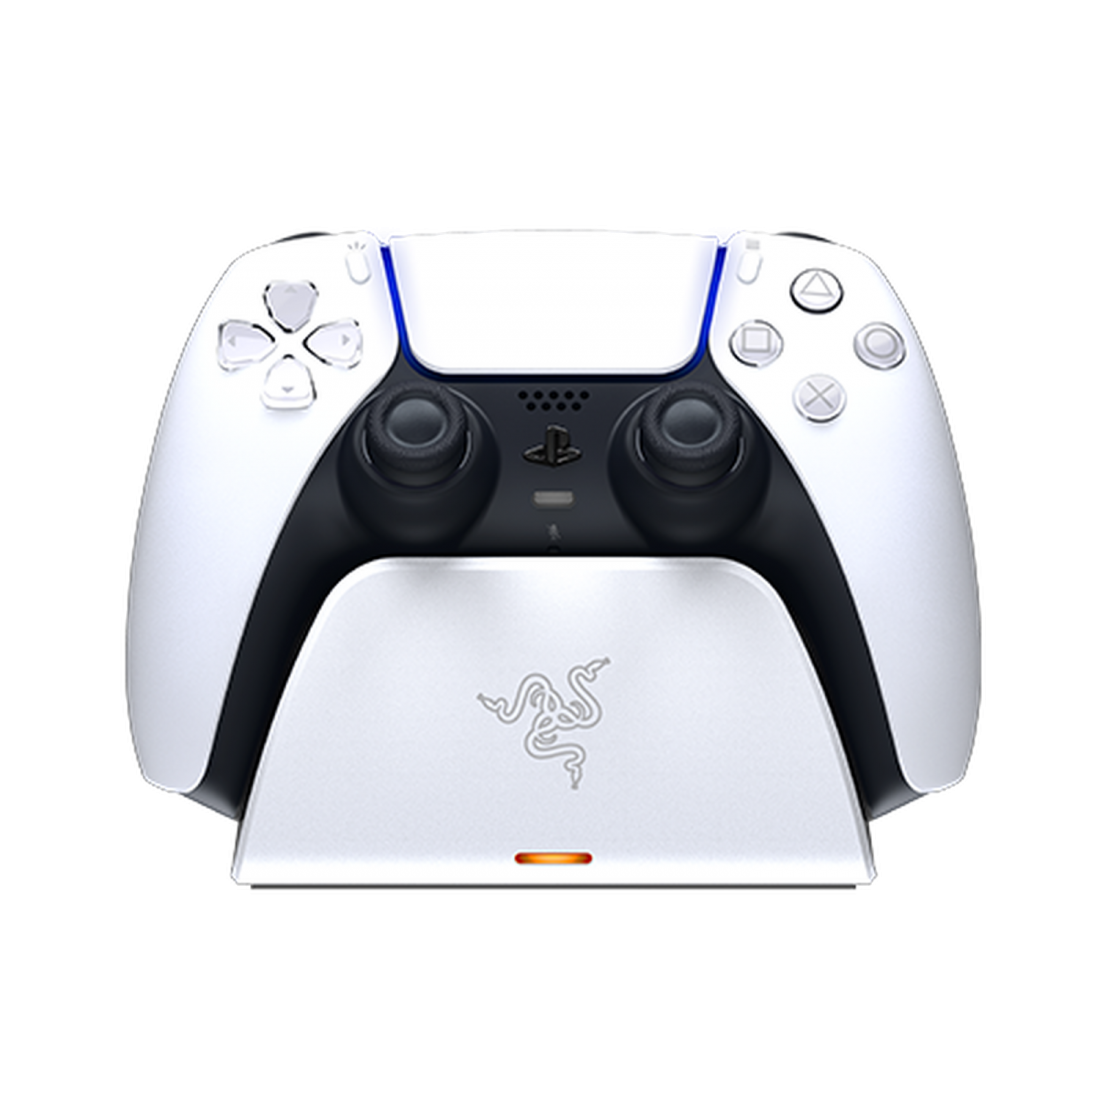 Pre-Owned RAZER QUICK CHARGING STAND FOR PS5 - WHITE